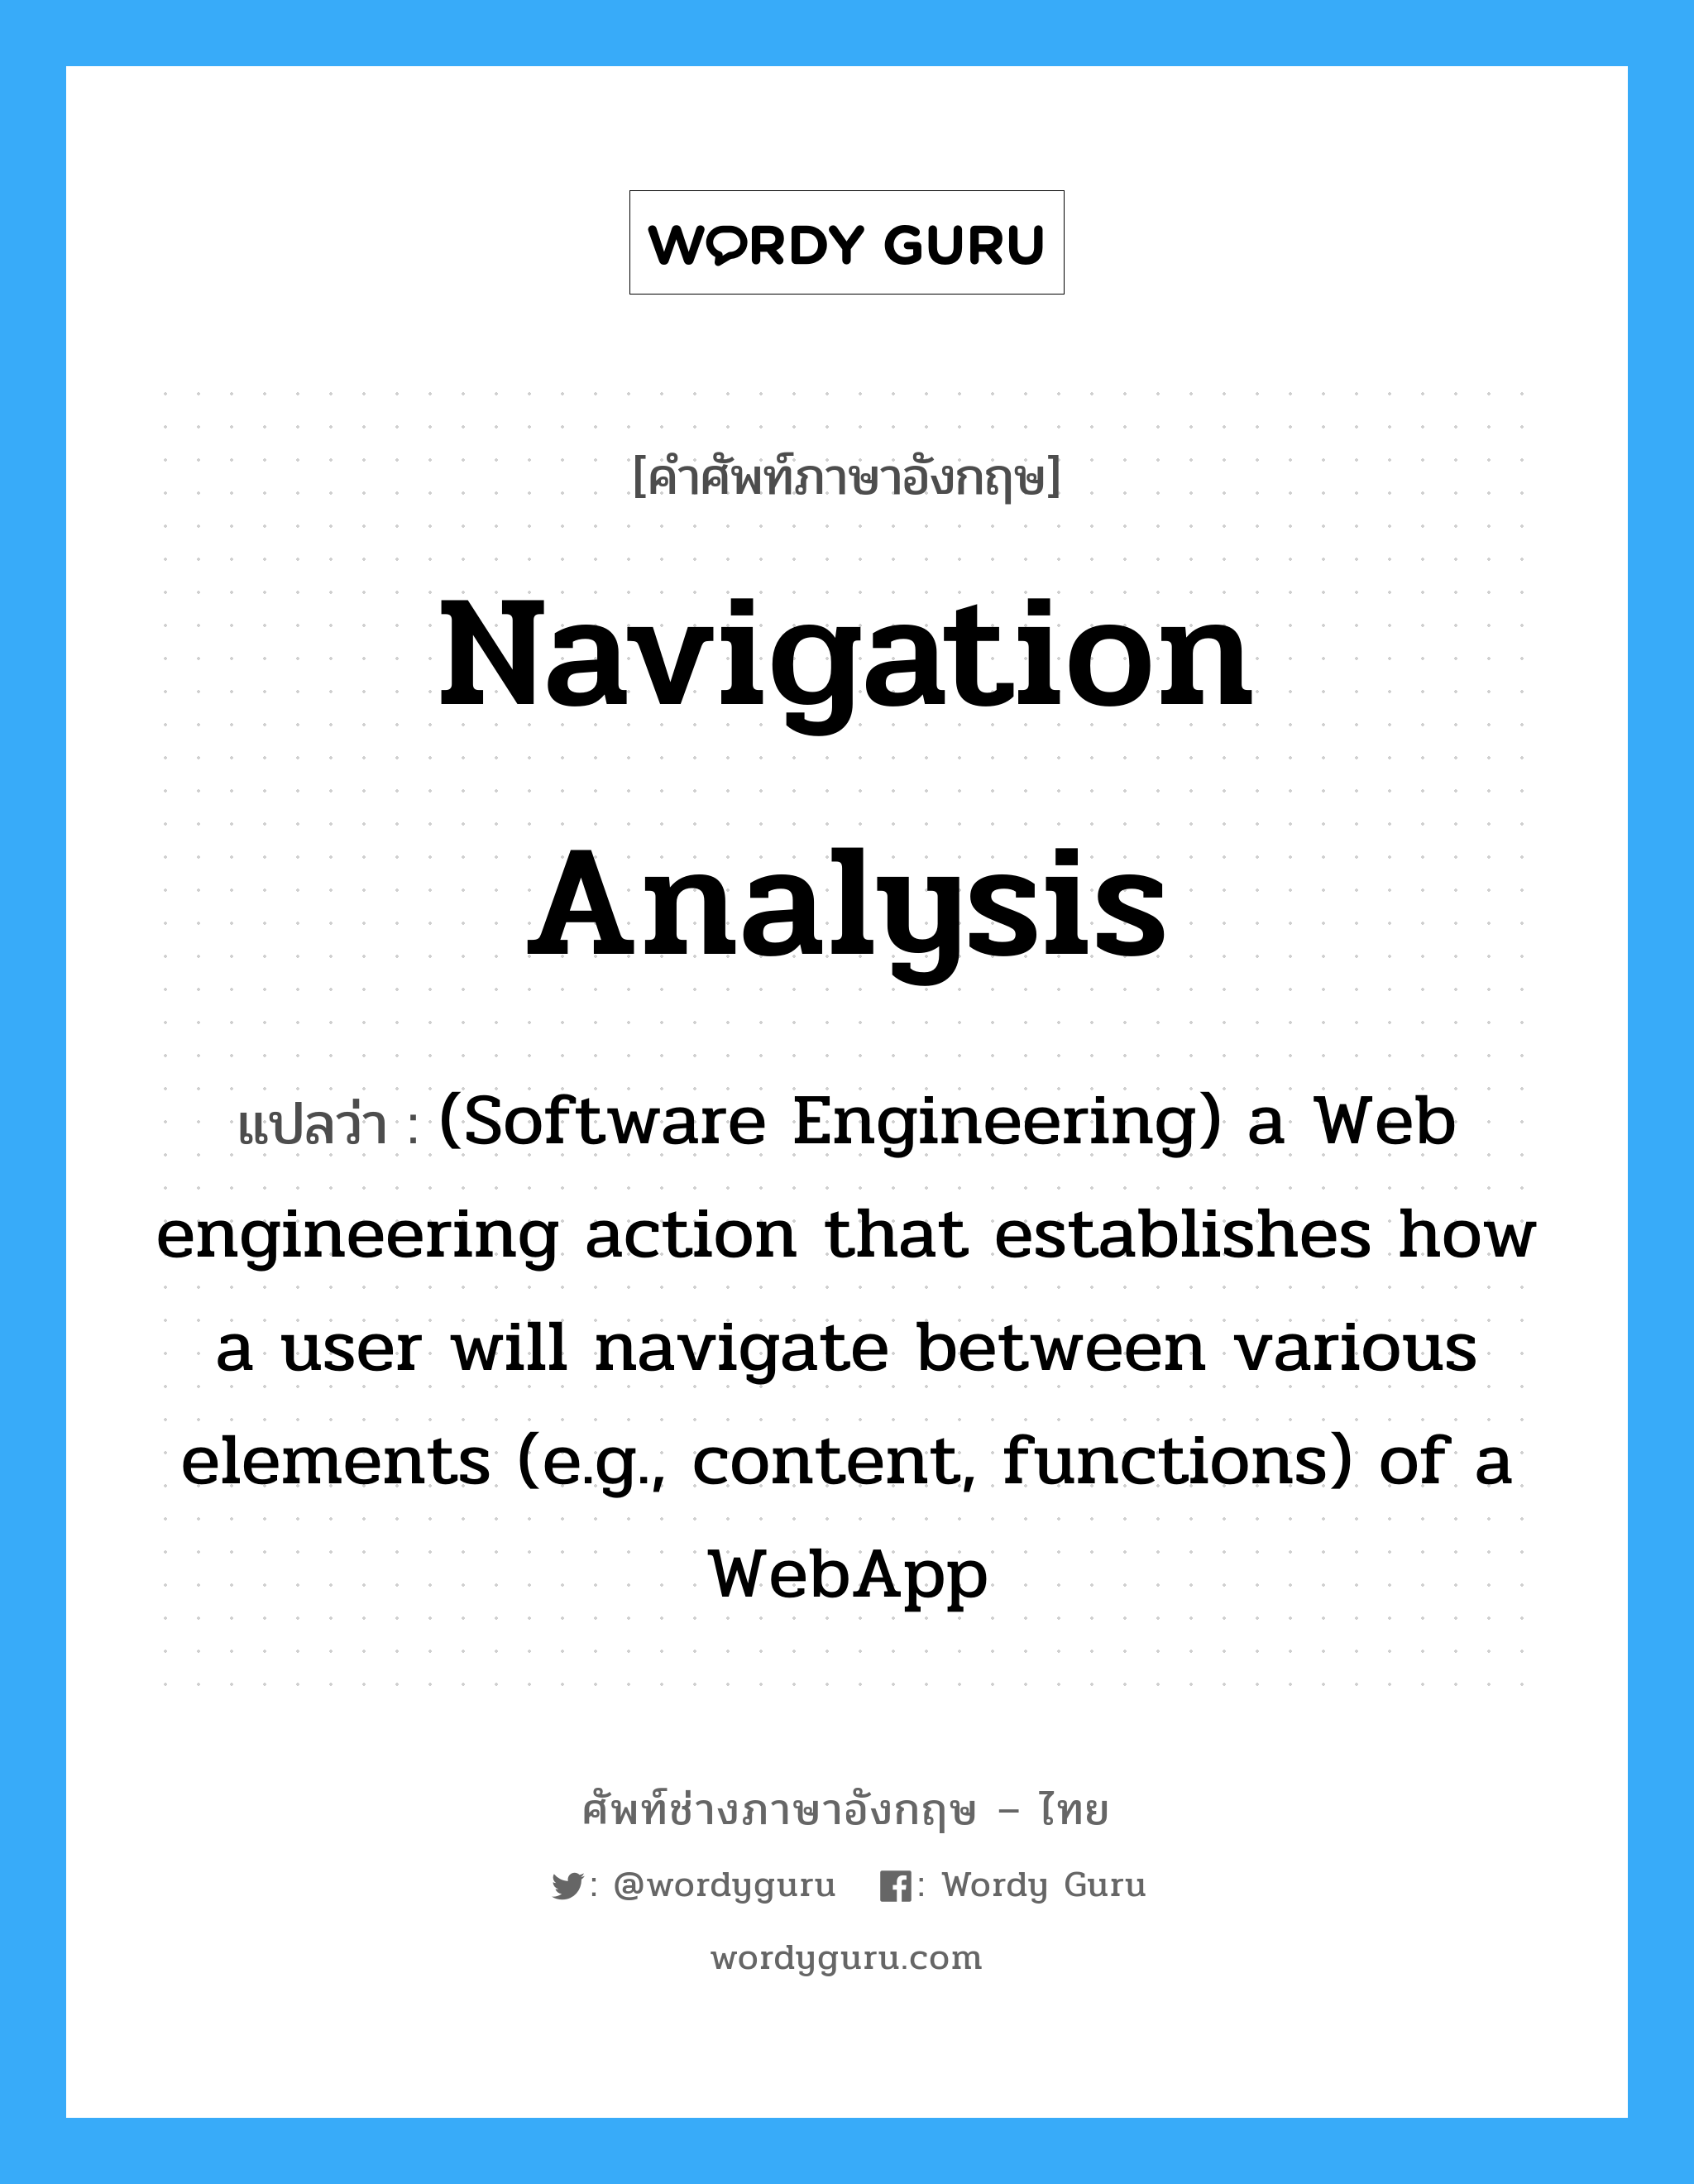 (Software Engineering) a Web engineering action that focuses on the aesthetics (e.g., the artistic elements) of a WebApp (often encompasses graphic design) ภาษาอังกฤษ?, คำศัพท์ช่างภาษาอังกฤษ - ไทย (Software Engineering) a Web engineering action that establishes how a user will navigate between various elements (e.g., content, functions) of a WebApp คำศัพท์ภาษาอังกฤษ (Software Engineering) a Web engineering action that establishes how a user will navigate between various elements (e.g., content, functions) of a WebApp แปลว่า Navigation analysis